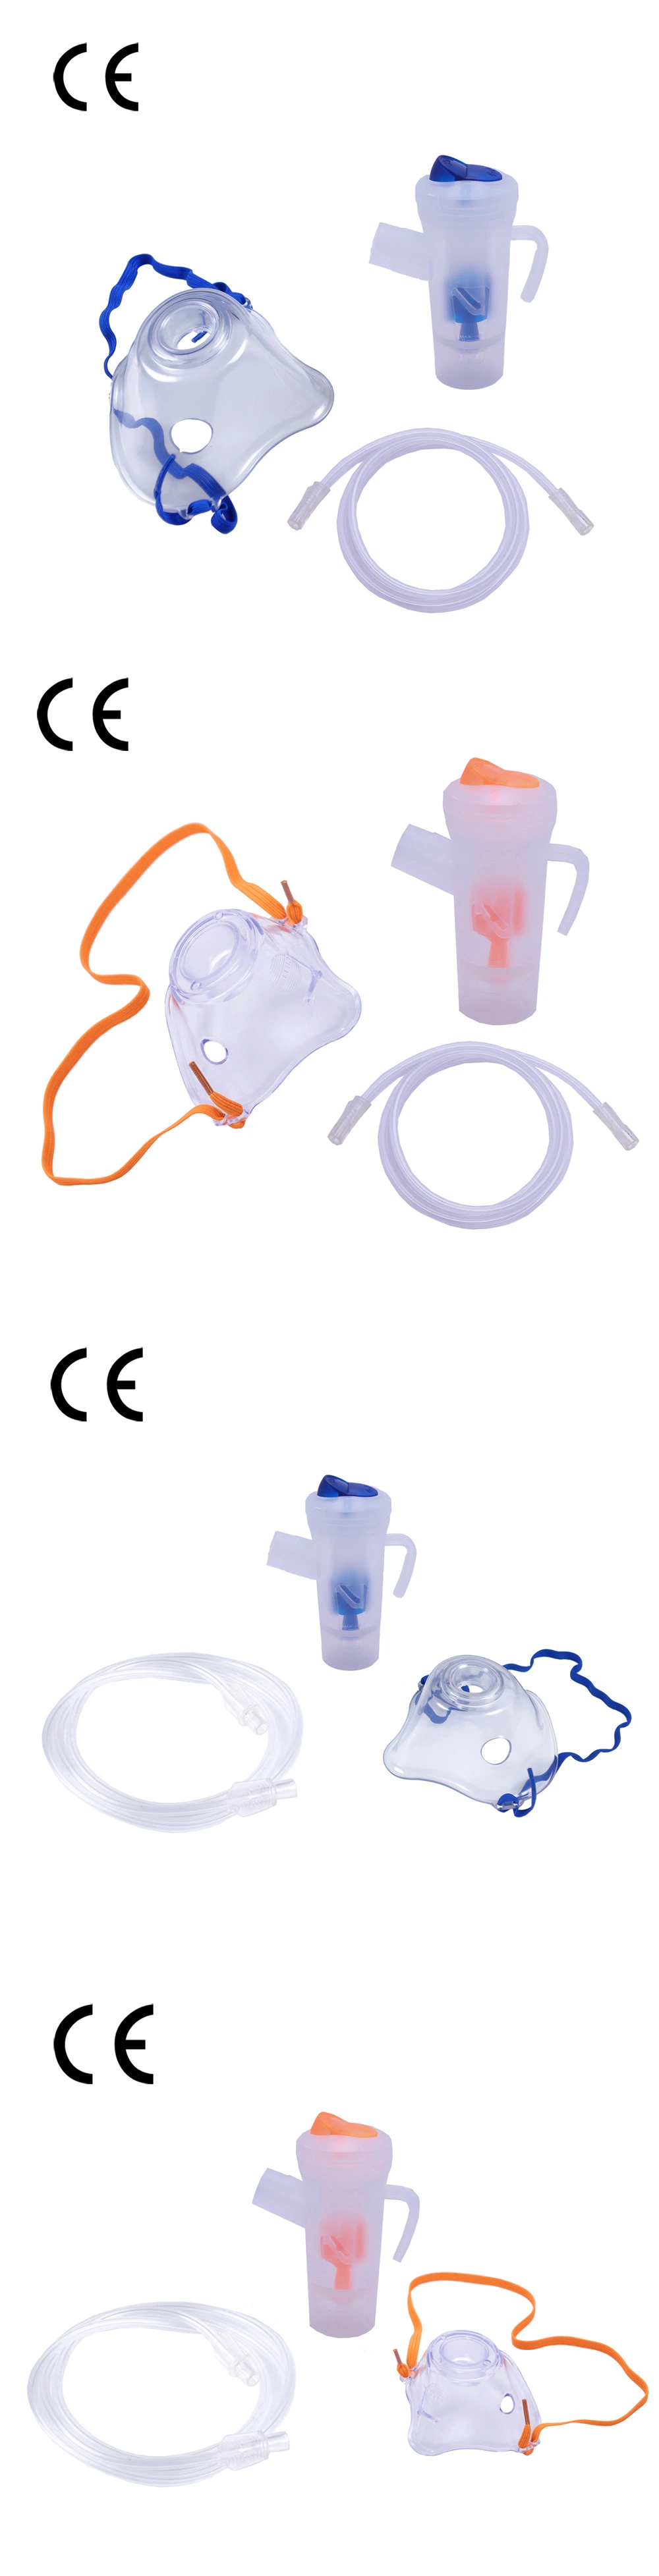 Nebulizer Cup Factory Medical Hospital Use Home Use Removable Disposable Nebulizer Kit Button Slide Twin Adjustment for Adult/Kids with CE/ISO